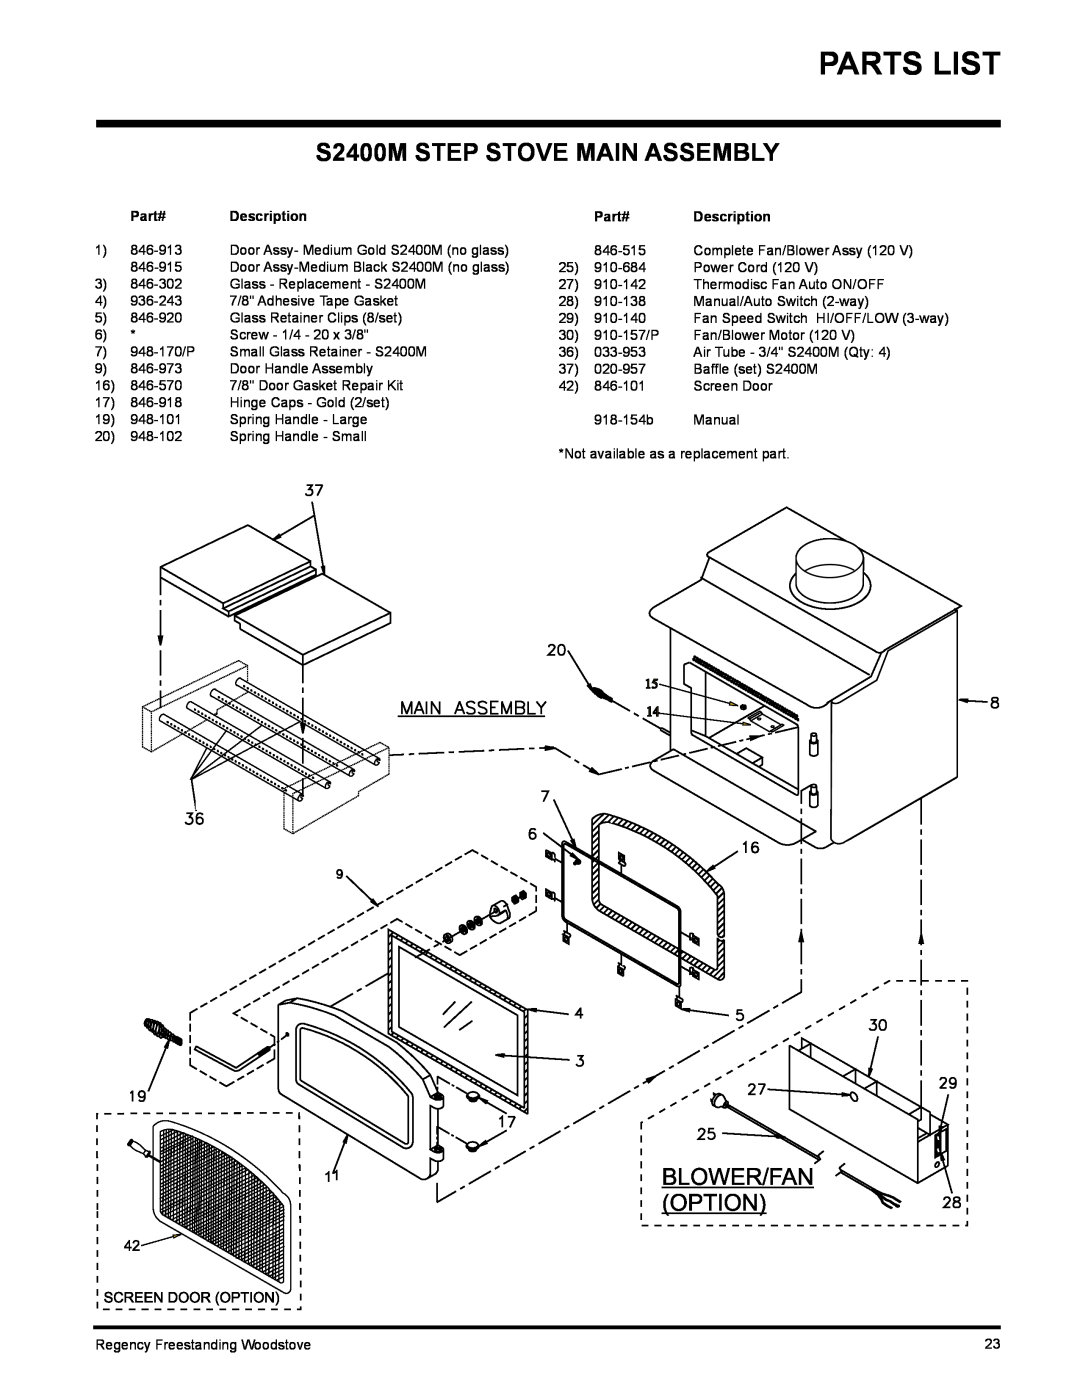 Regency F2400M installation manual Parts List, S2400M STEP STOVE MAIN ASSEMBLY 